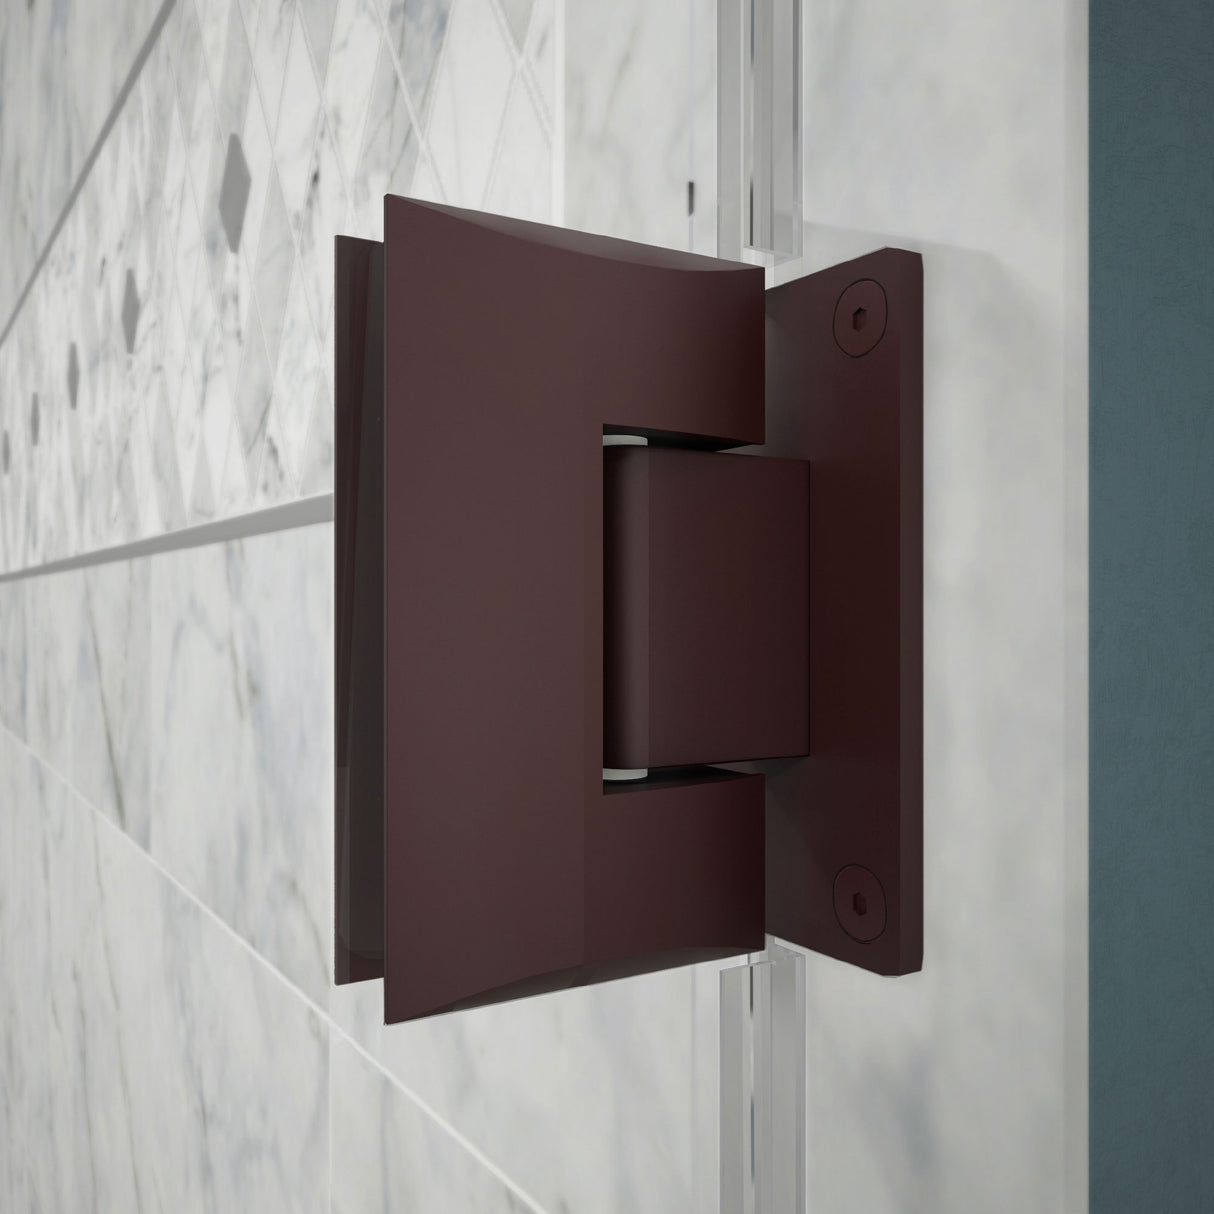 DreamLine Unidoor Plus 51 in. W x 30 3/8 in. D x 72 in. H Frameless Hinged Shower Enclosure in Oil Rubbed Bronze